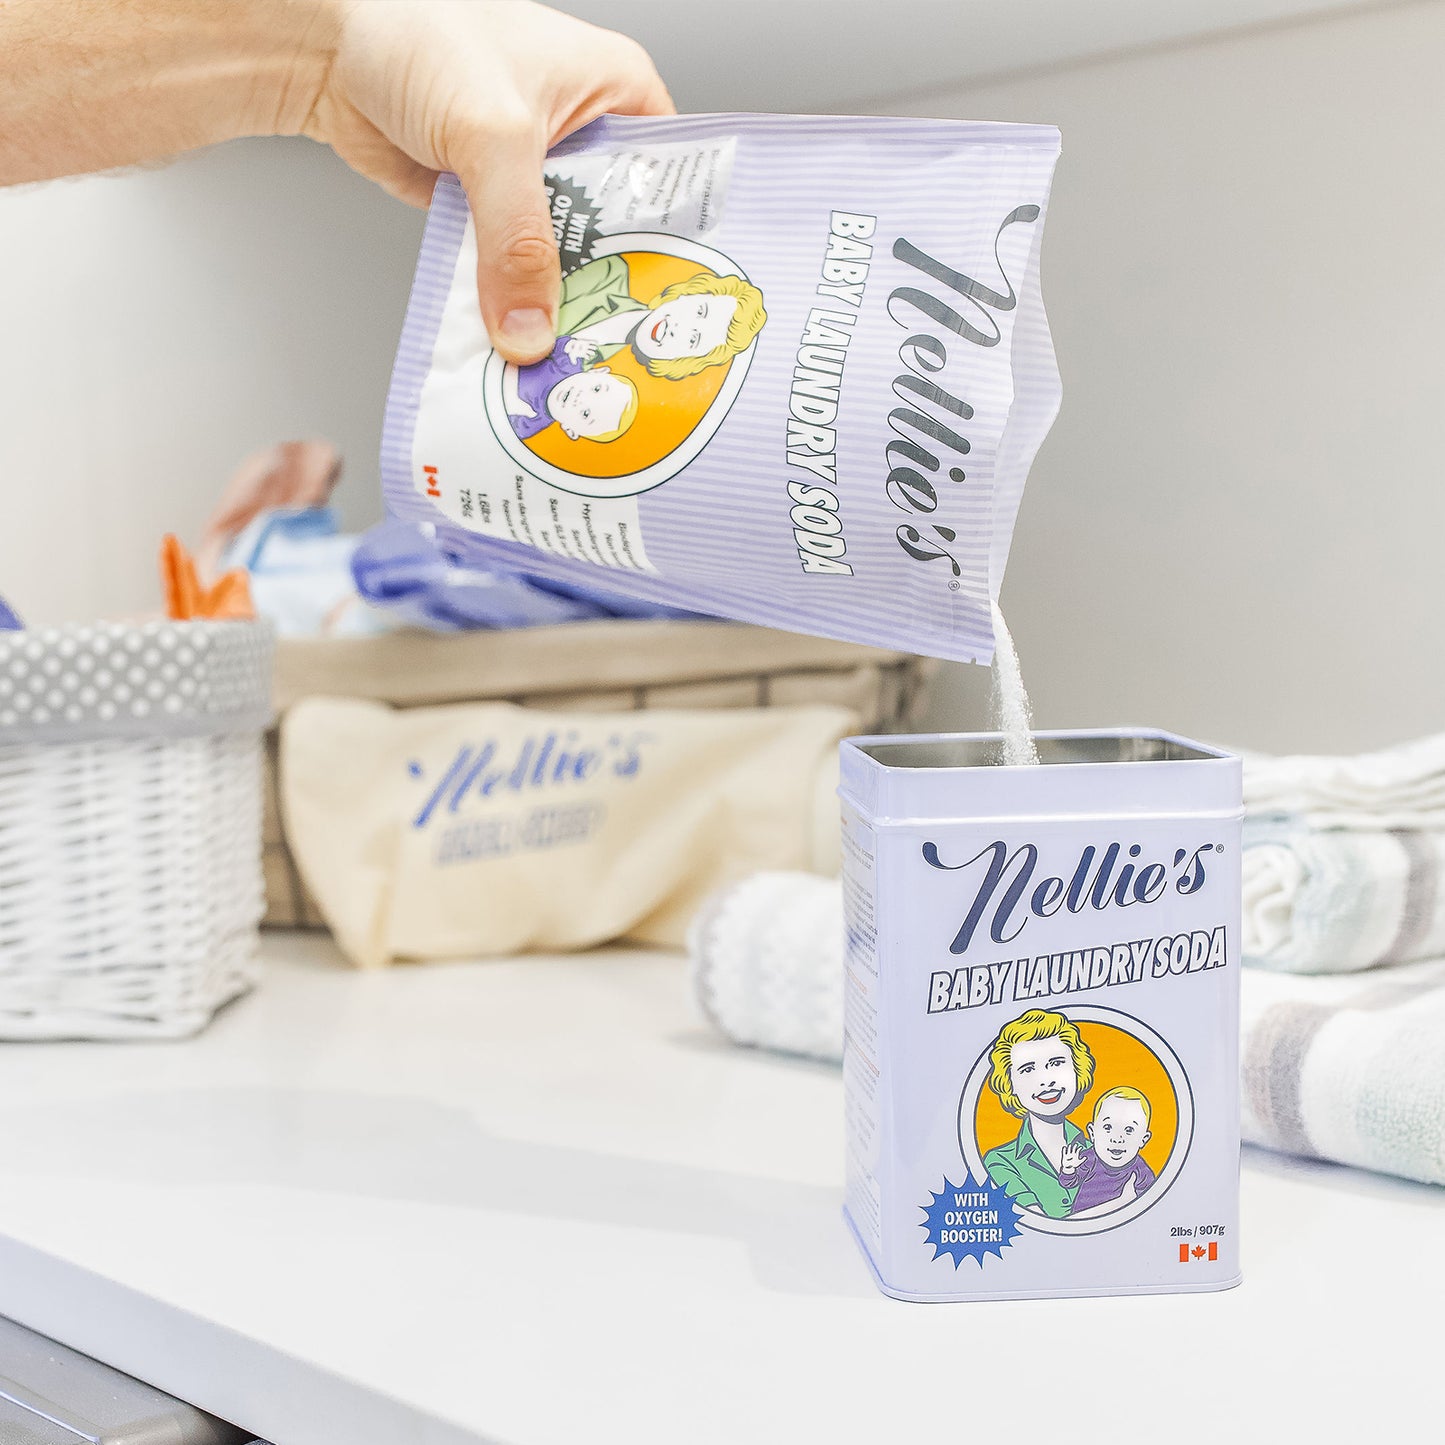 A male hand pouring Nellie's Baby Laundry Soda from it's Refill pack into the Tin